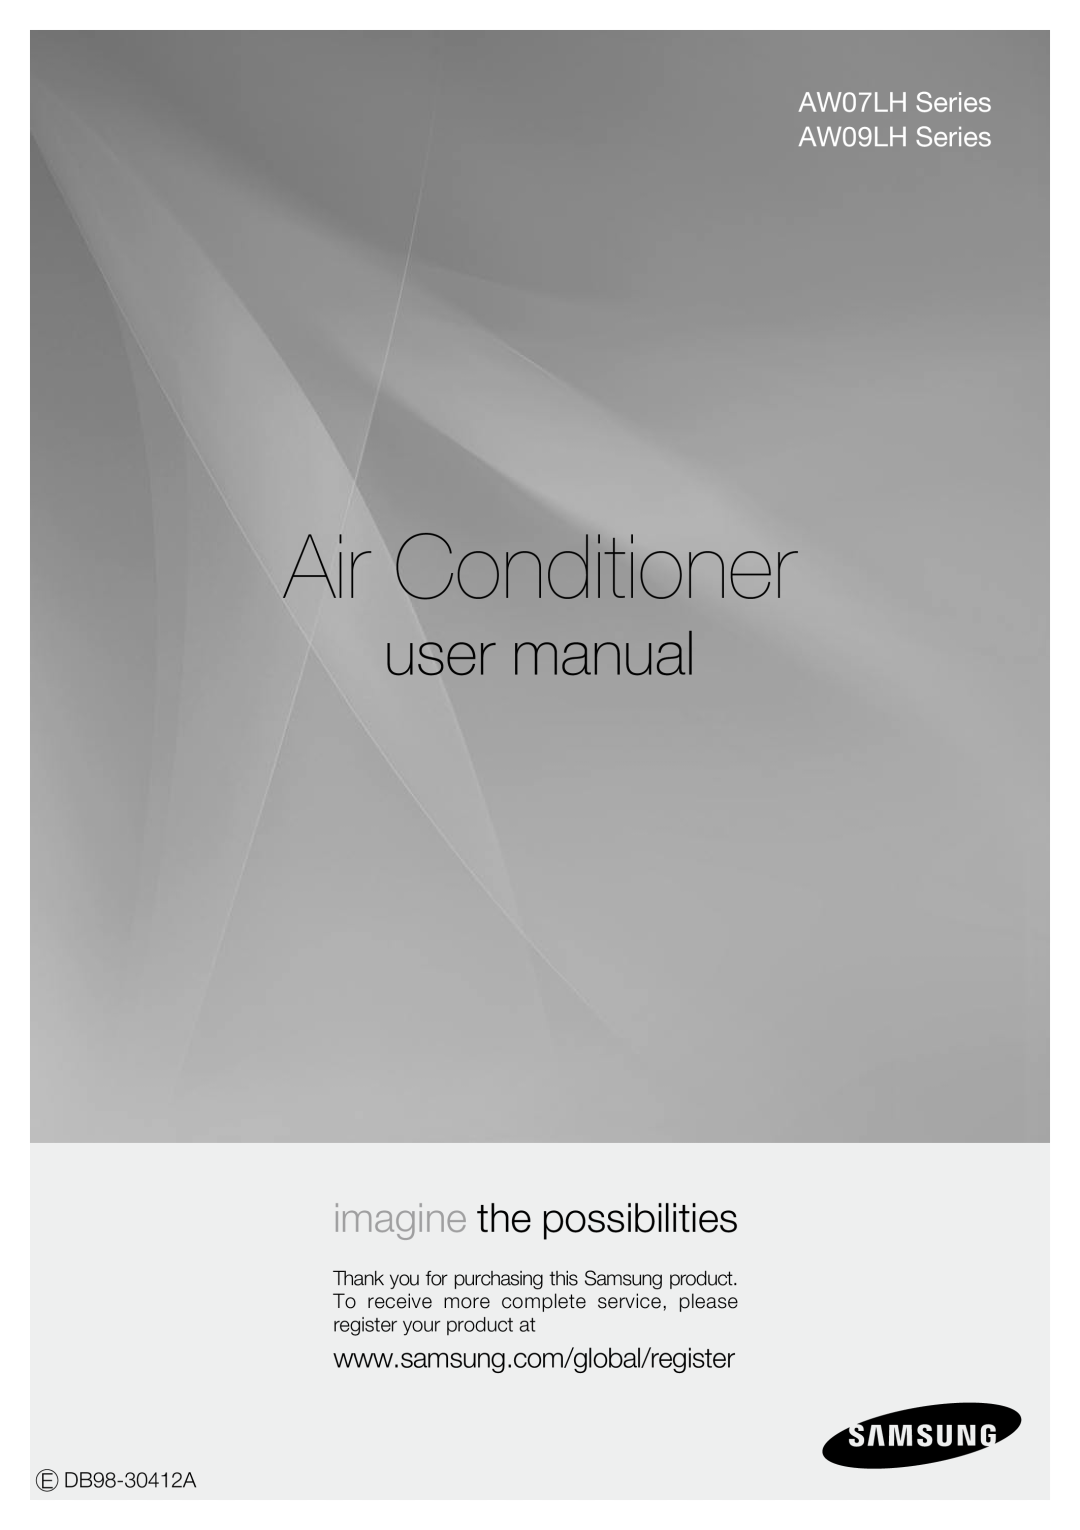 Samsung user manual Air Conditioner, imagine the possibilities, AW07LH Series AW09LH Series 